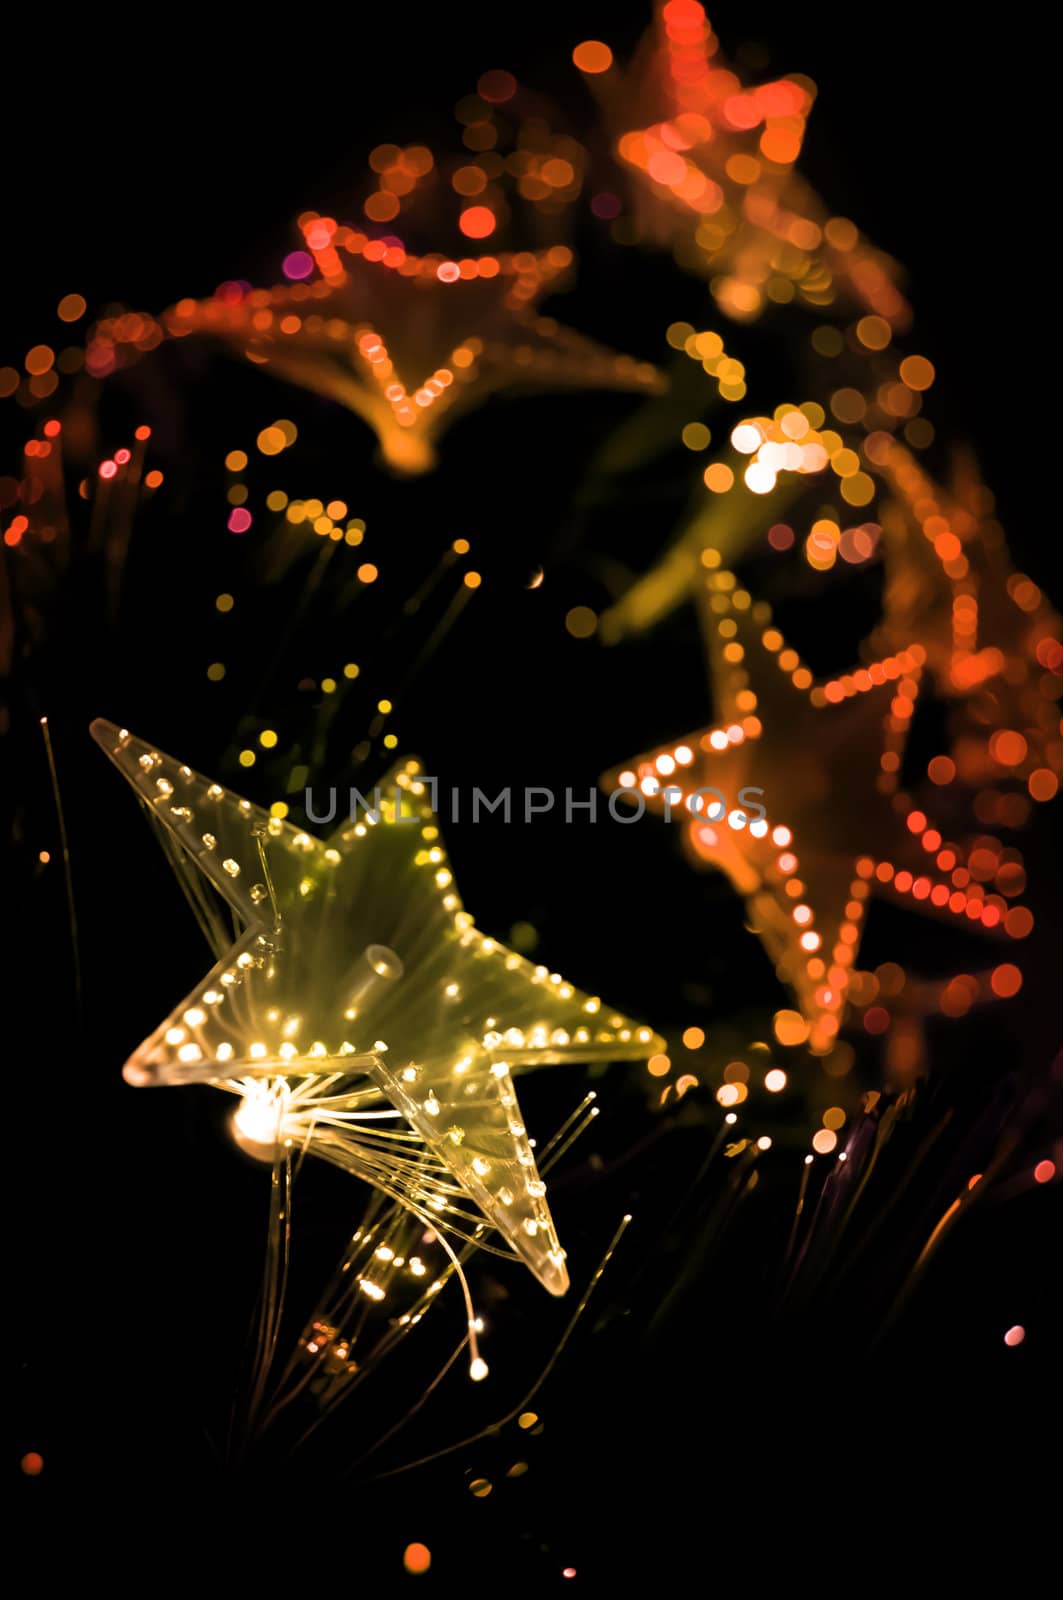 A view from the base of a Christmas tree with illuminated golden, orange and red lights. Focus on foreground lights with black background.